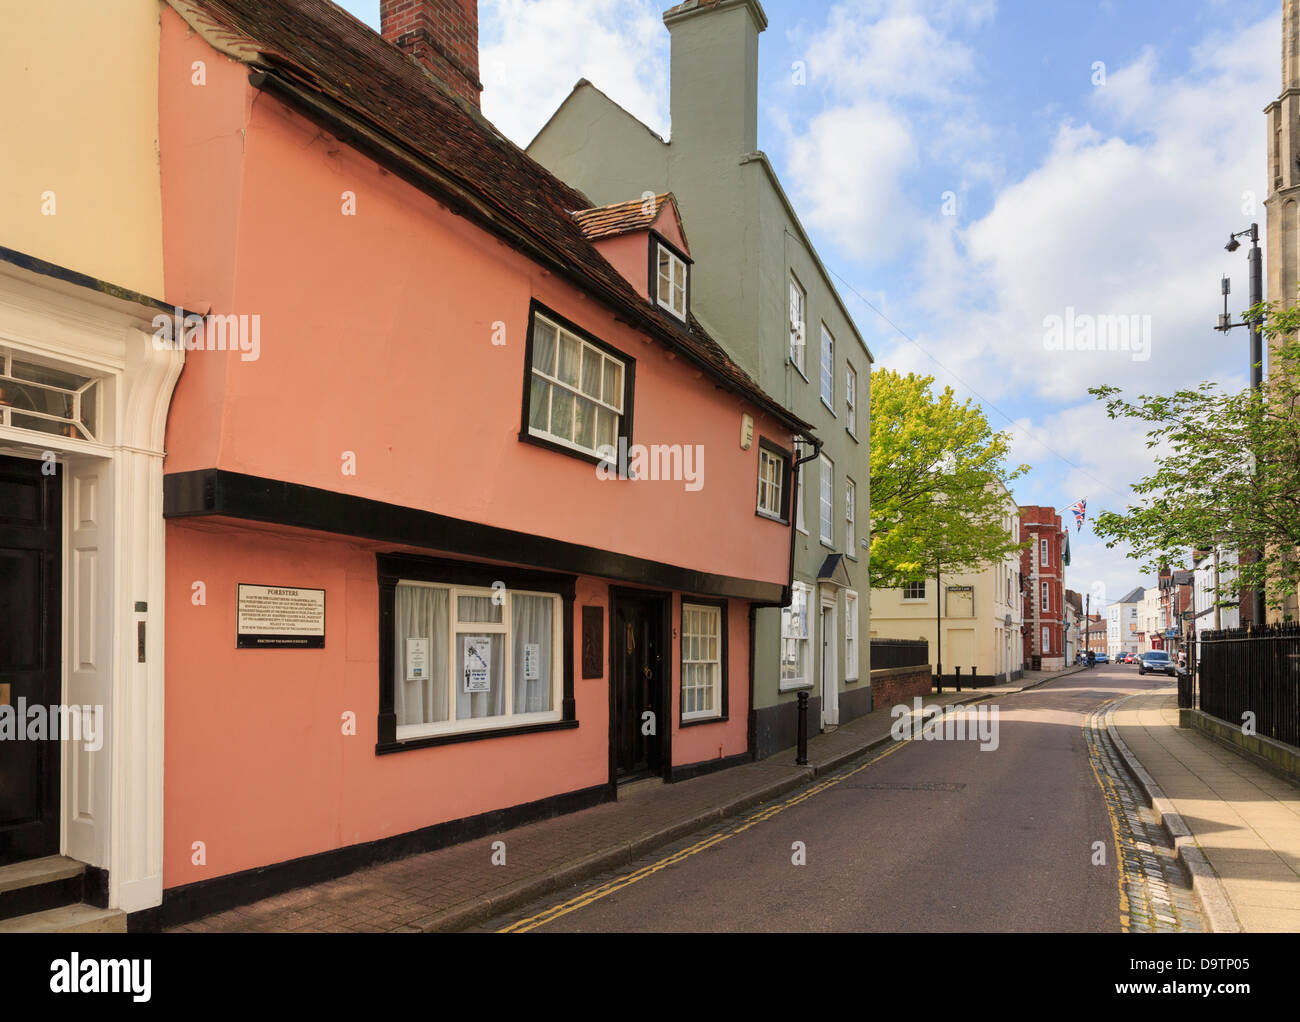 15th century Foresters circa 1450 is said to be oldest house in the town. Church Street, Harwich, Essex, England, UK, Britain Stock Photo